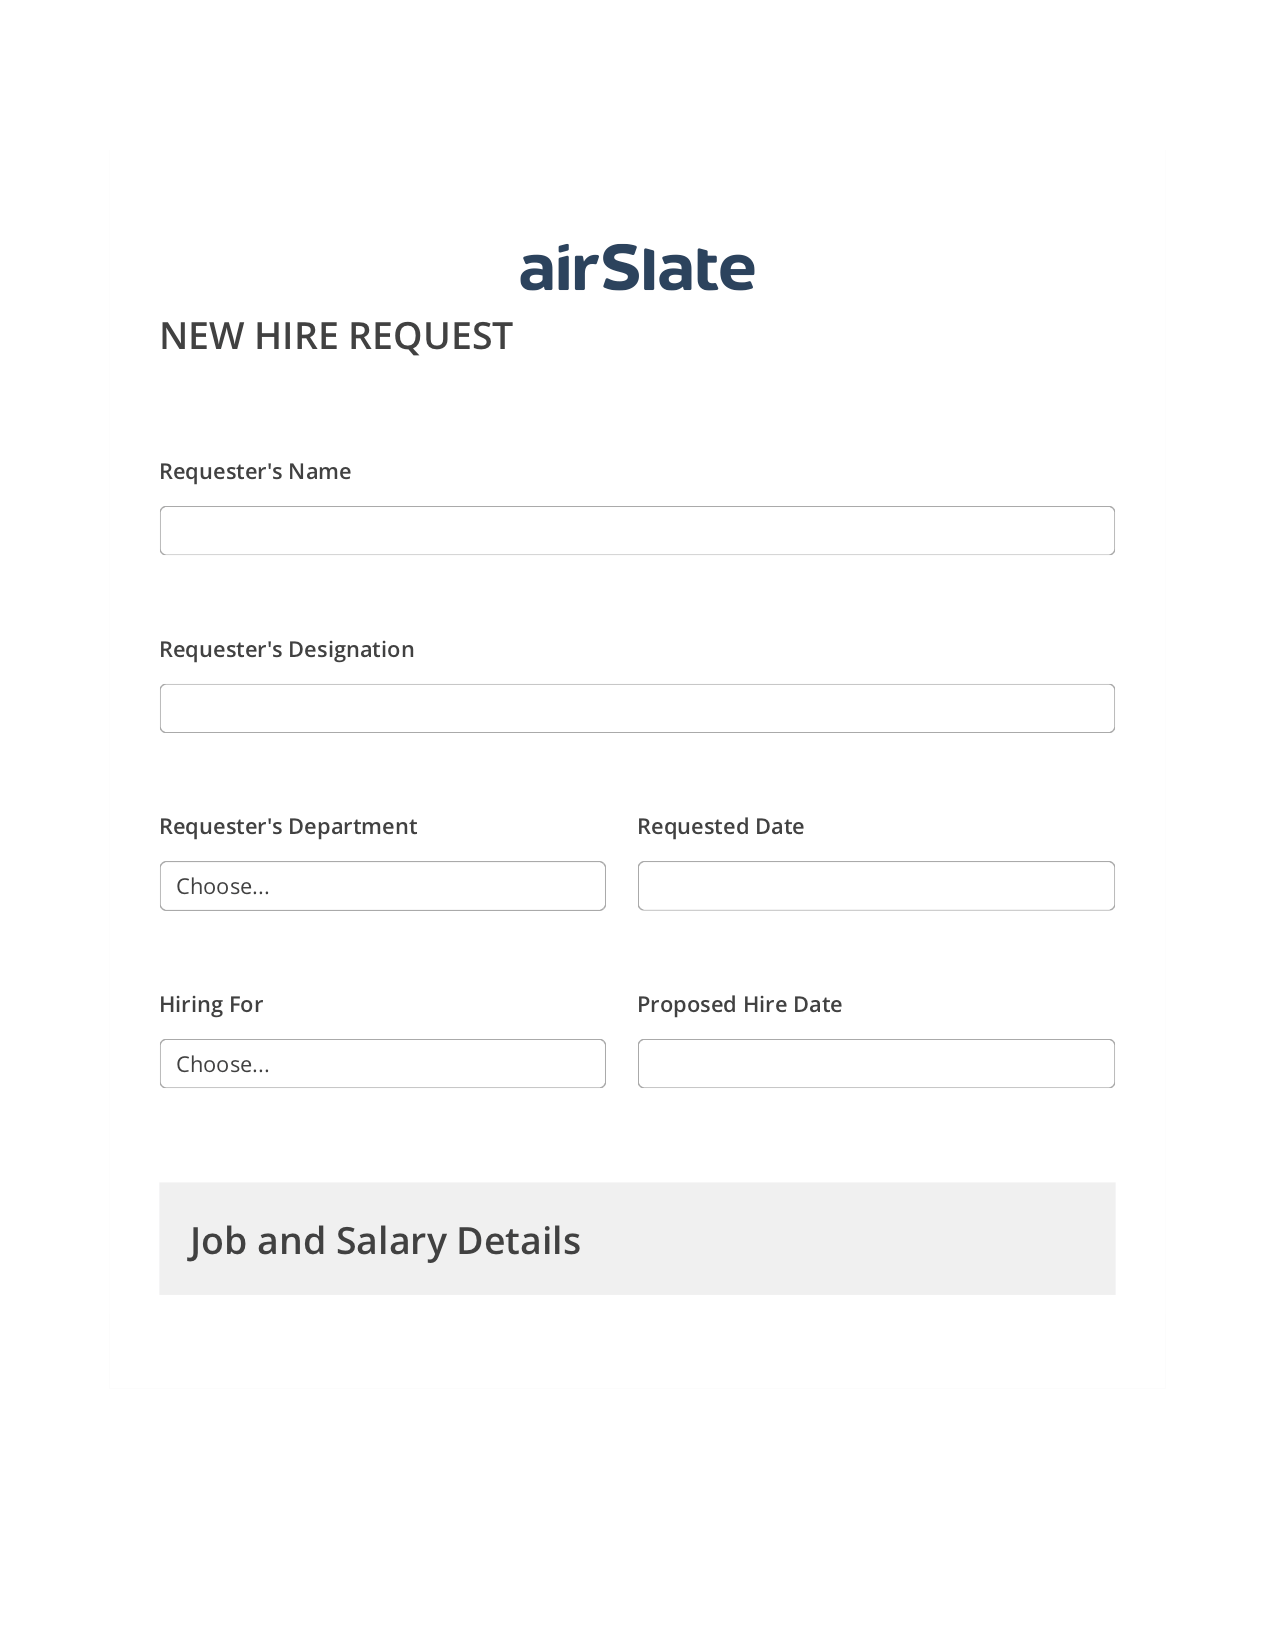 Hiring Request Workflow Pre-fill from AirTable Bot, Open under a Role Bot, Export to Smartsheet